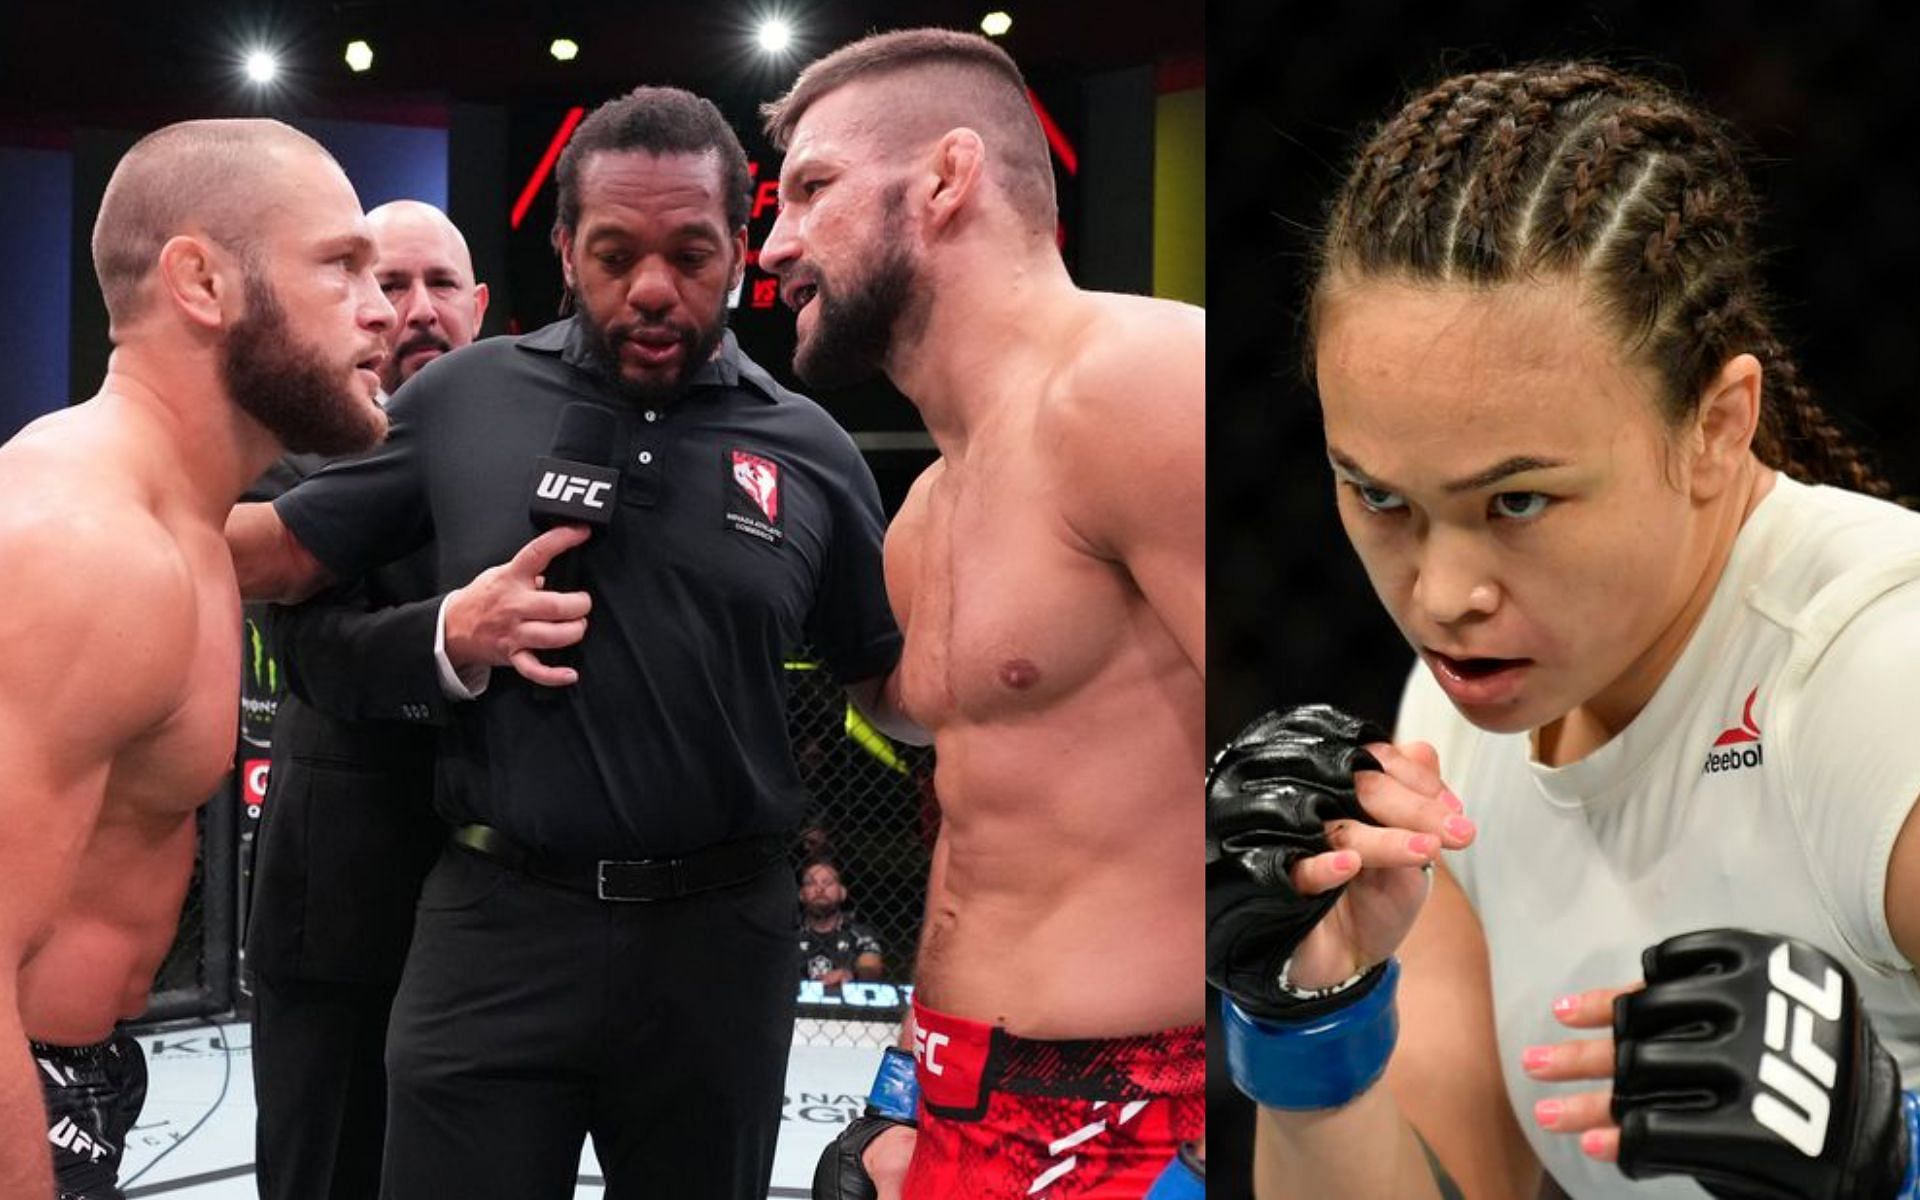 Rafael Fiziev vs Mateusz Gamrot (left) and Michelle Waterson (right). [via Getty Images]